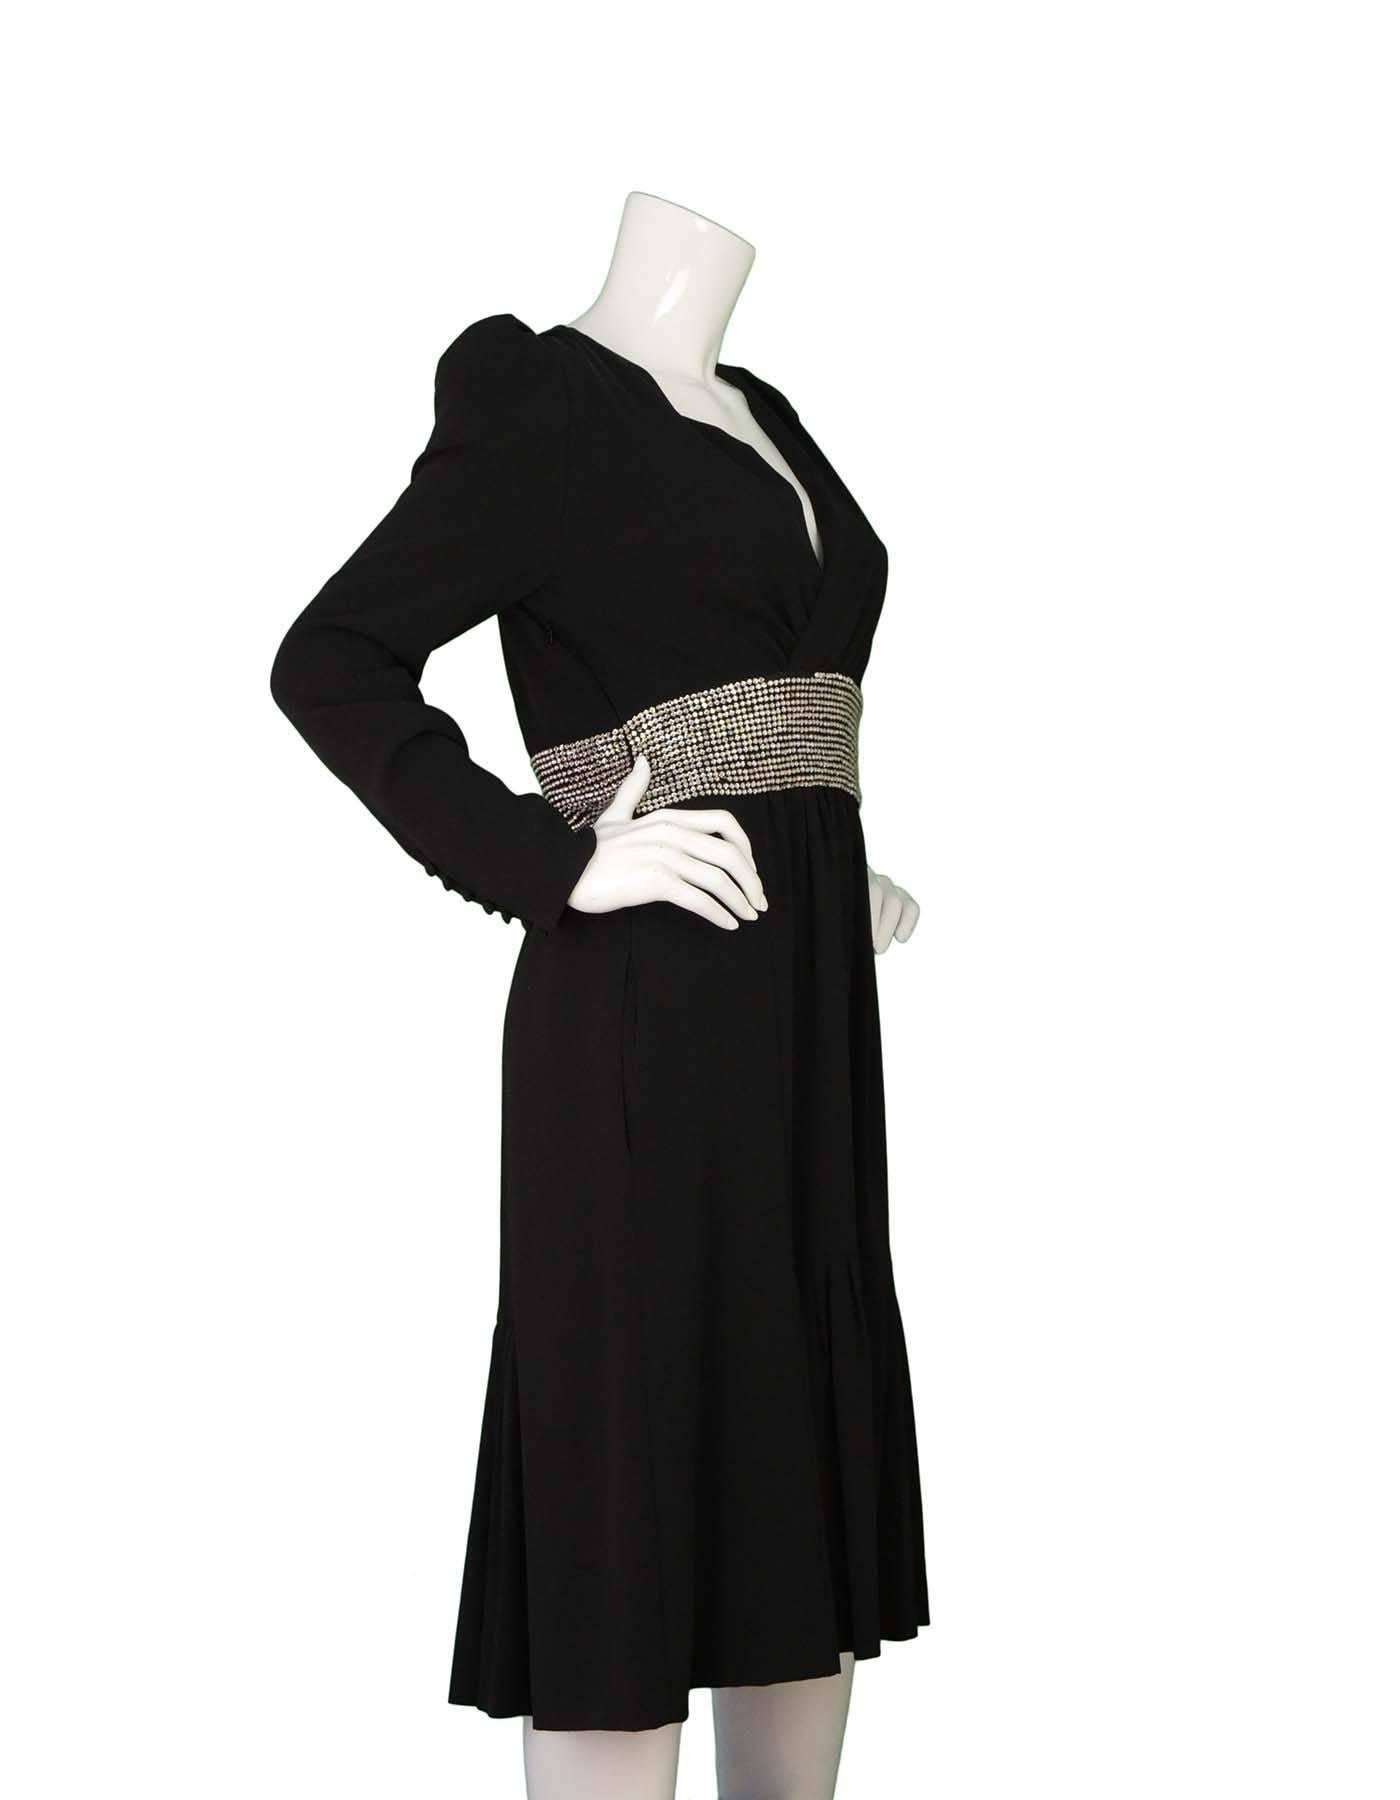 Chloe Black & Rhinestone Long Sleeve Cocktail Dress
Features crystal embellishments at waistline and open back
Made in: France
Color: Black
Composition: 100% silk
Lining: Black, 100% silk
Closure/opening: Side zipper
Exterior Pockets: Two